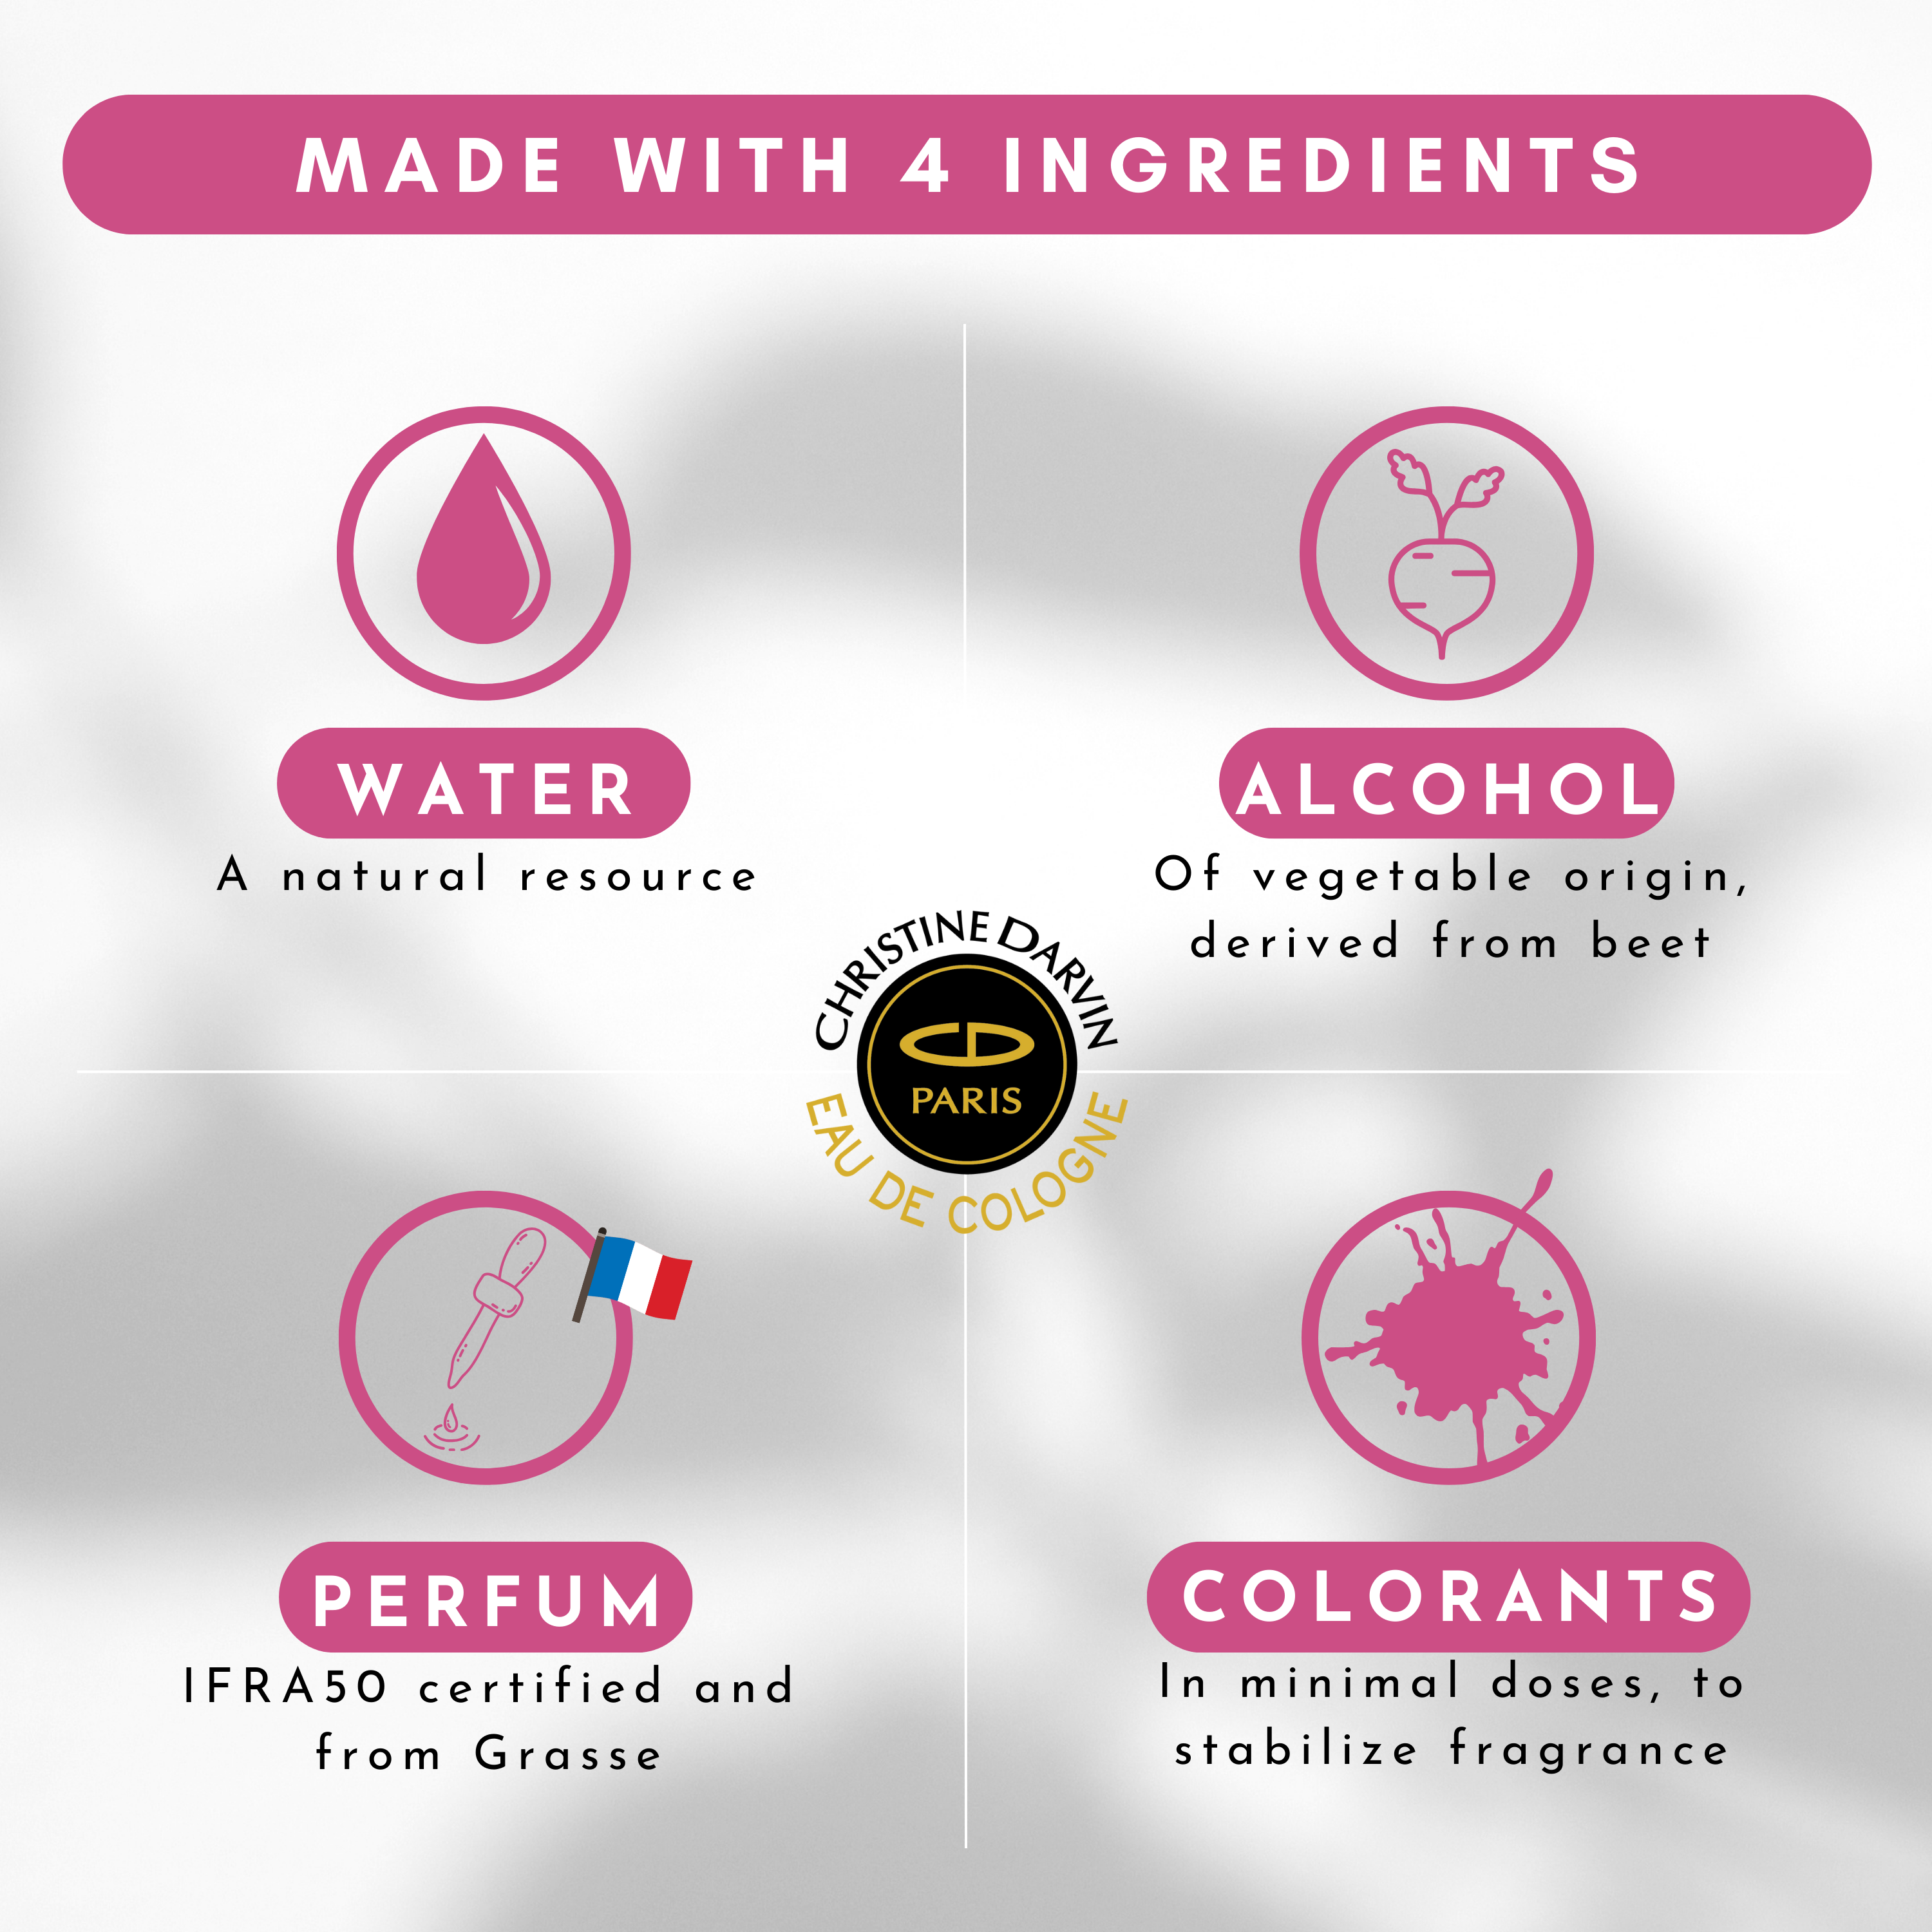 Ingredients Eau de Cologne fragrance Peony 97% natural origin and 100% French